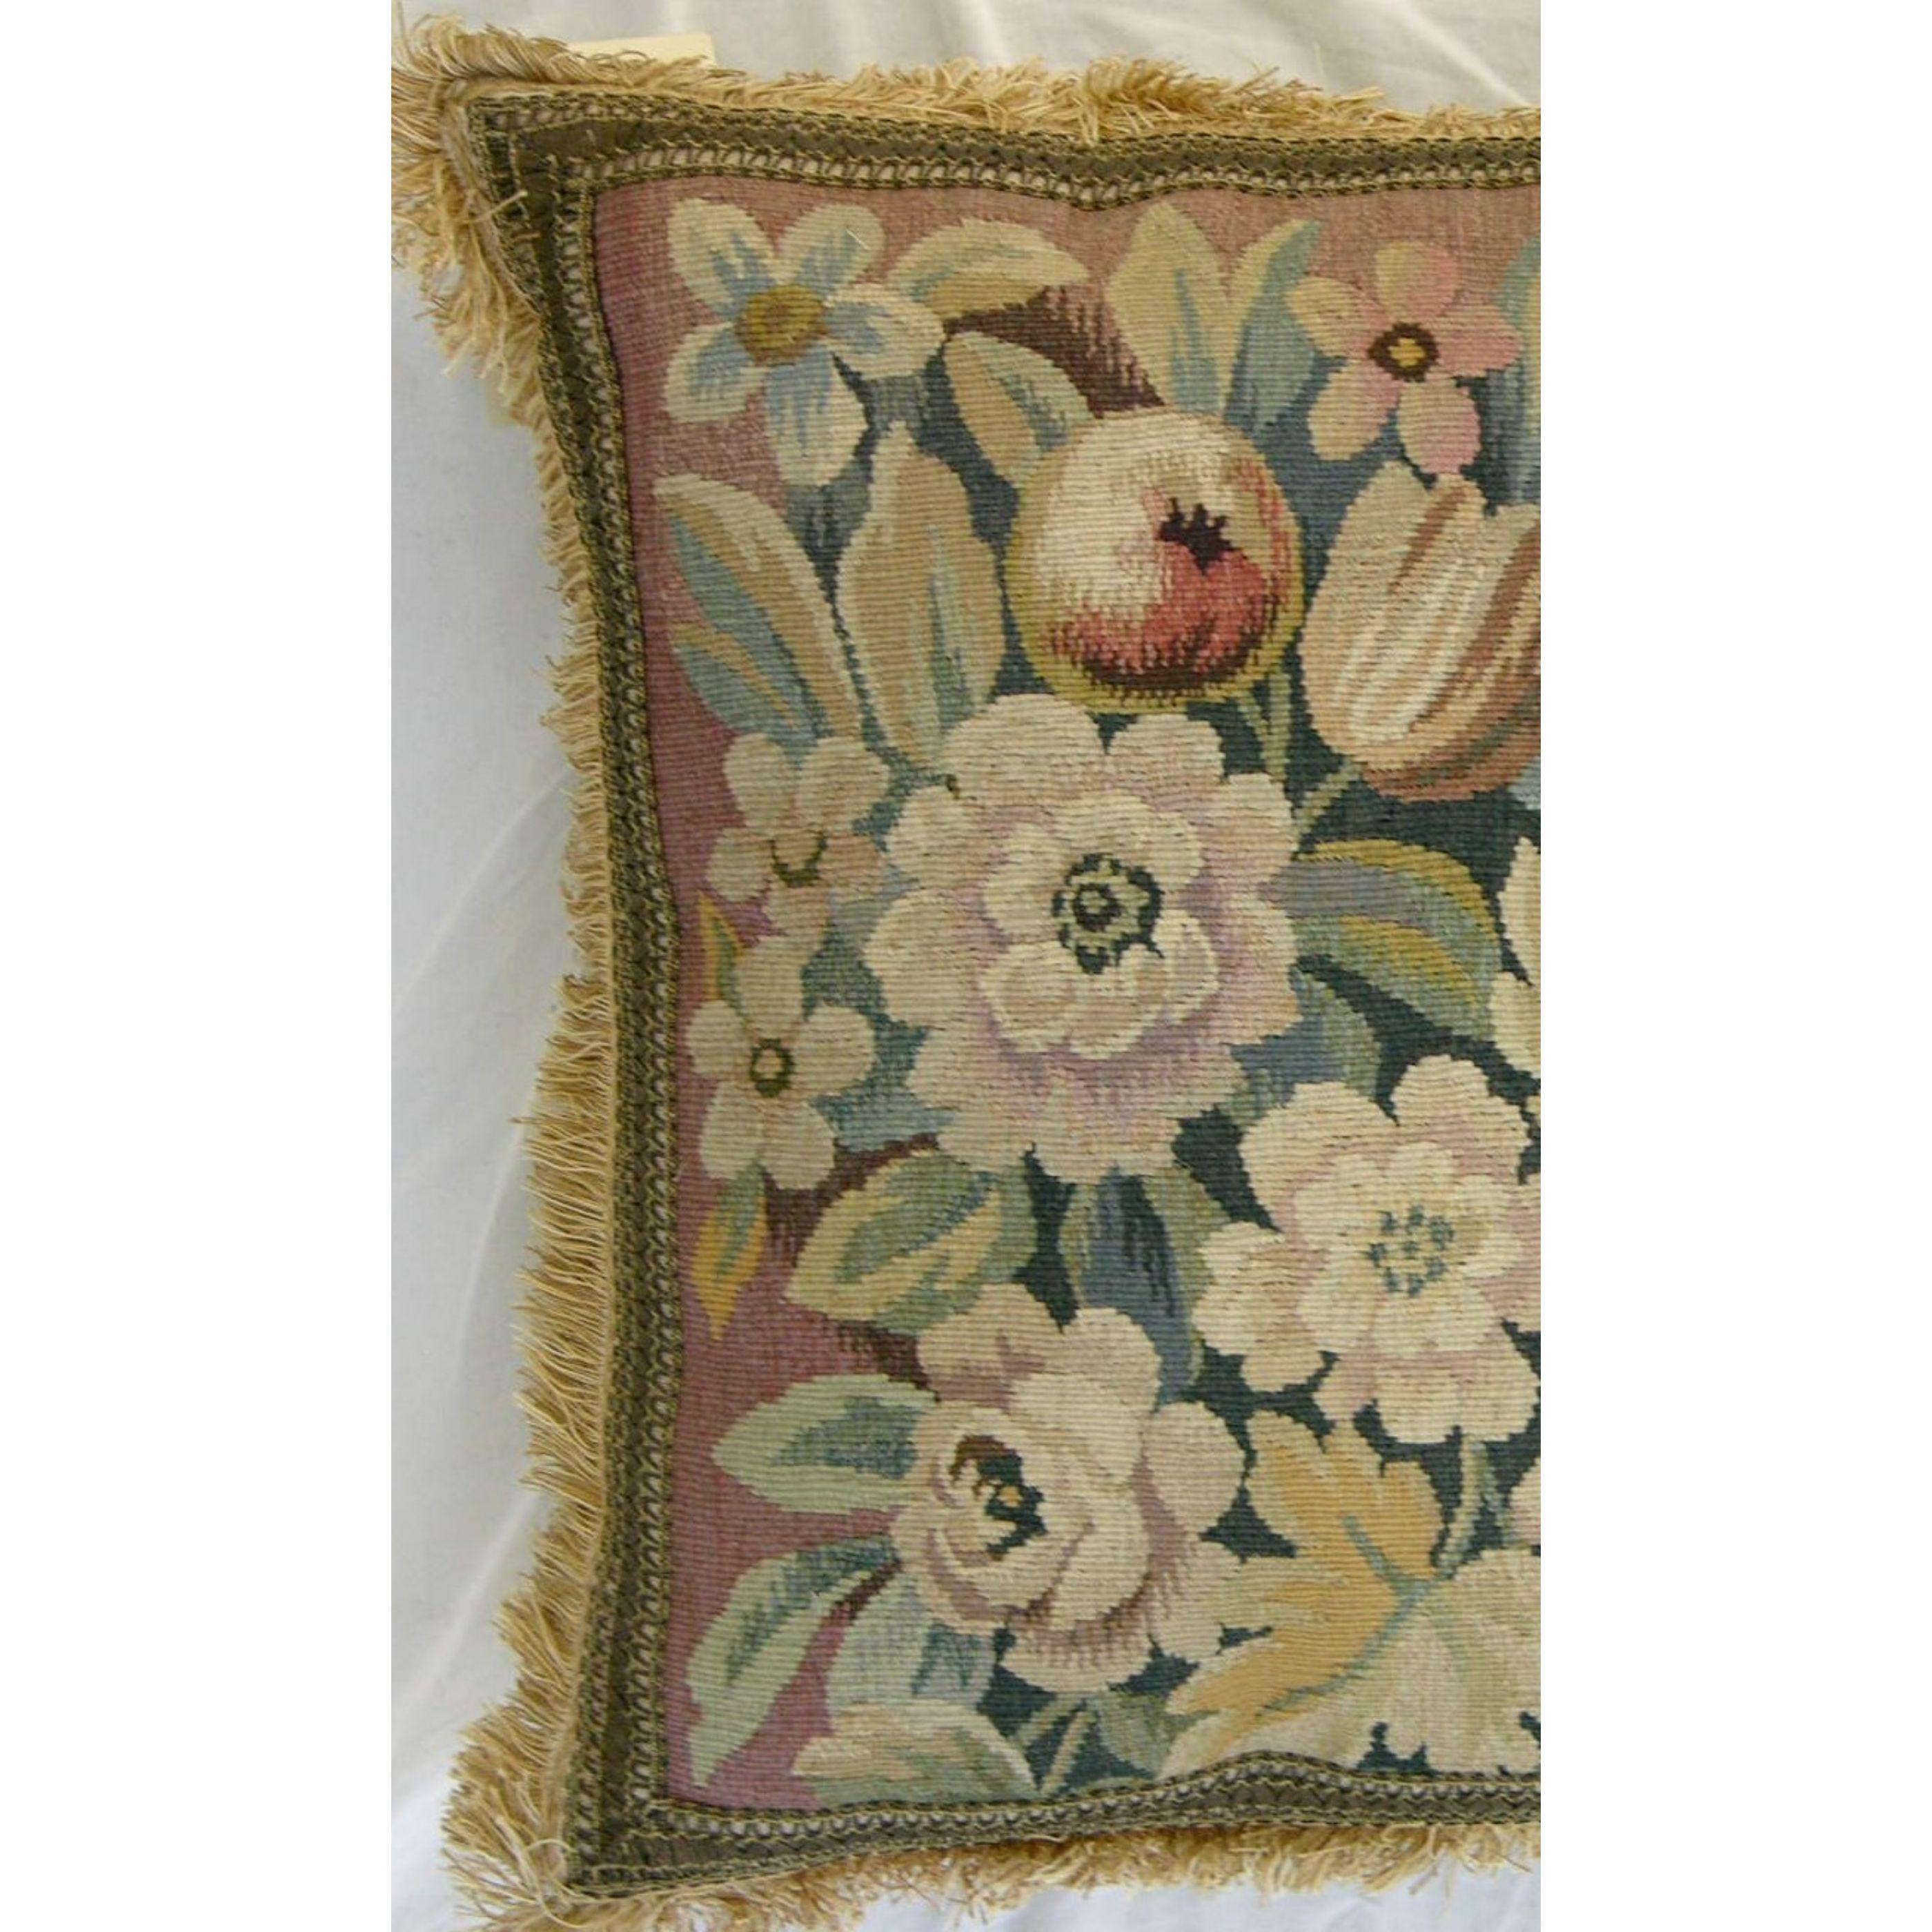 Antique 19th century French Aubusson tapestry pillow. 19'' x 19'' x 6''.